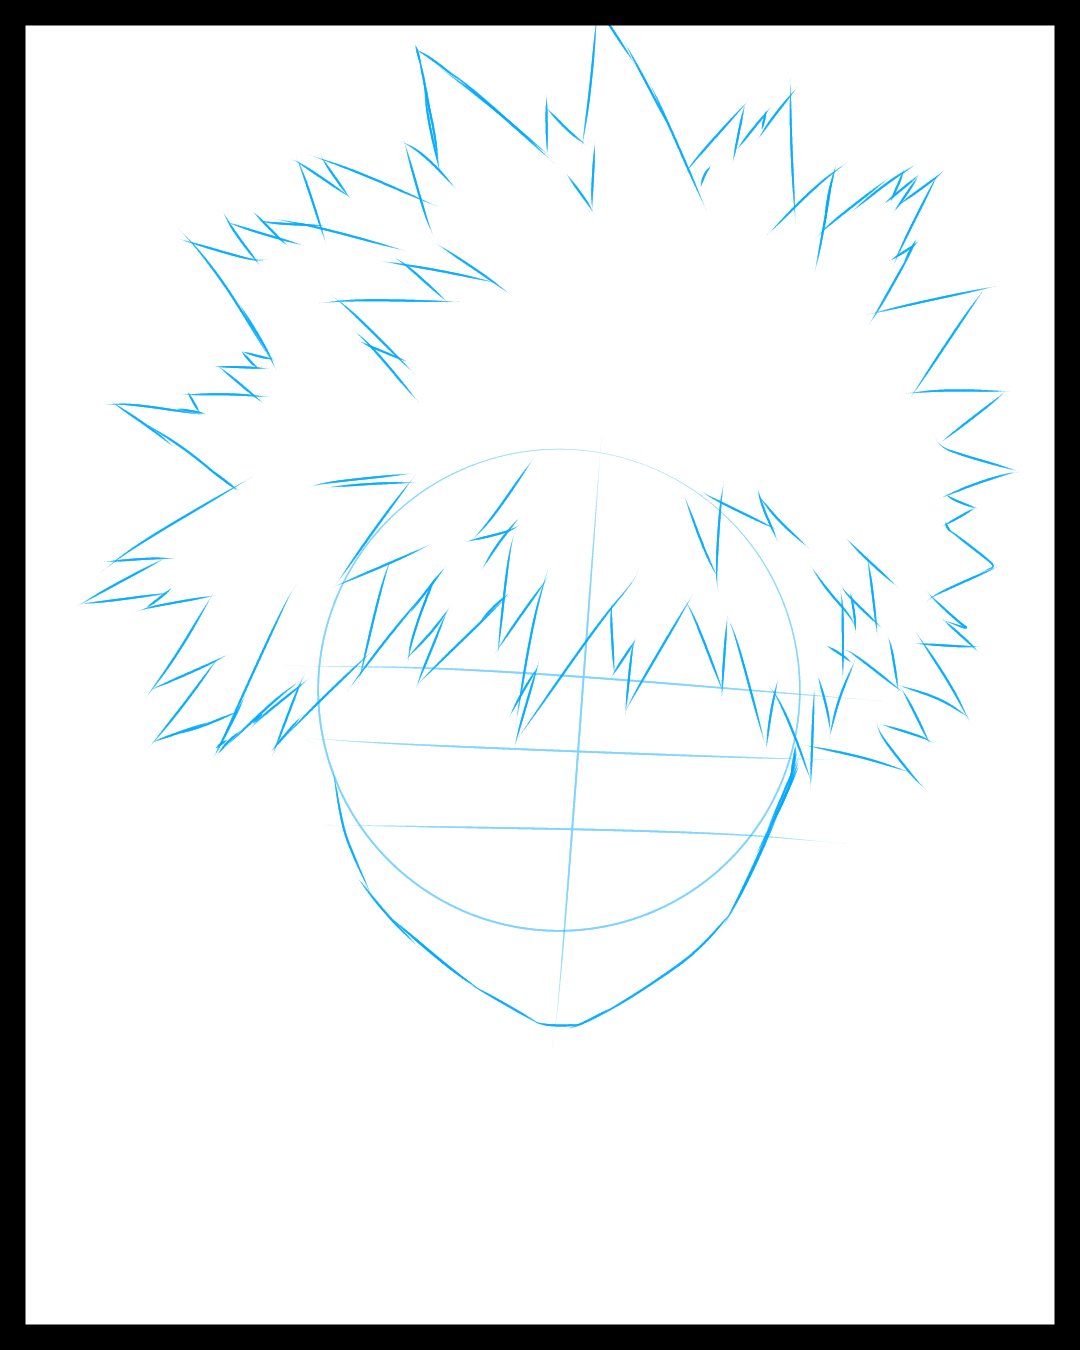 Step 4 (Draw short and spiky Hairs)